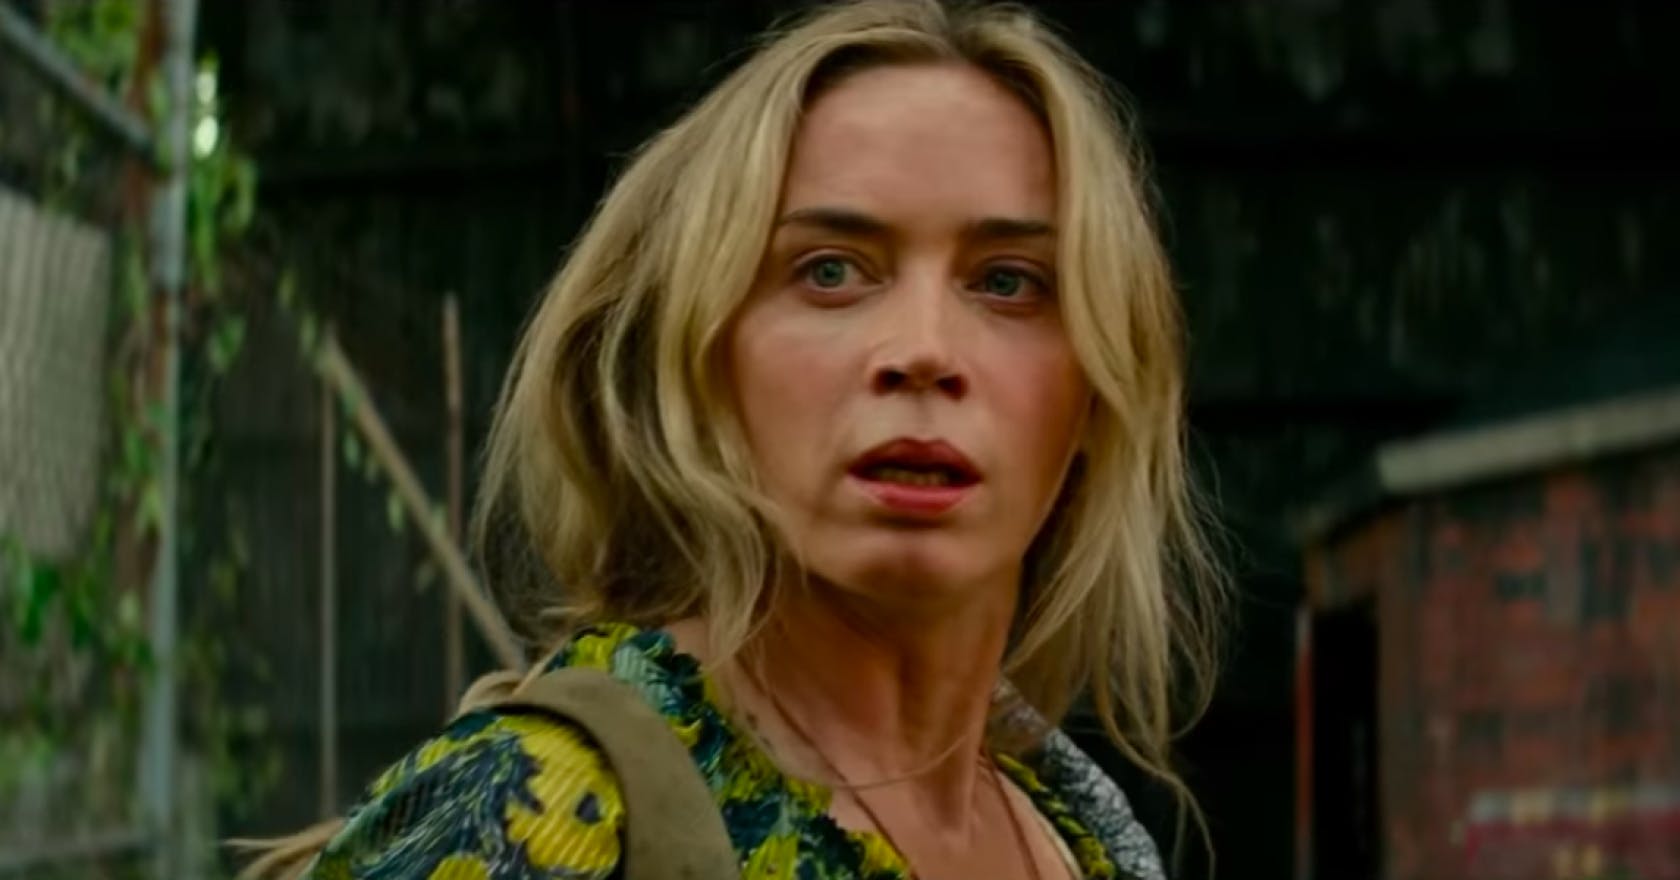 A Quiet Place II: everything we know about the sequel